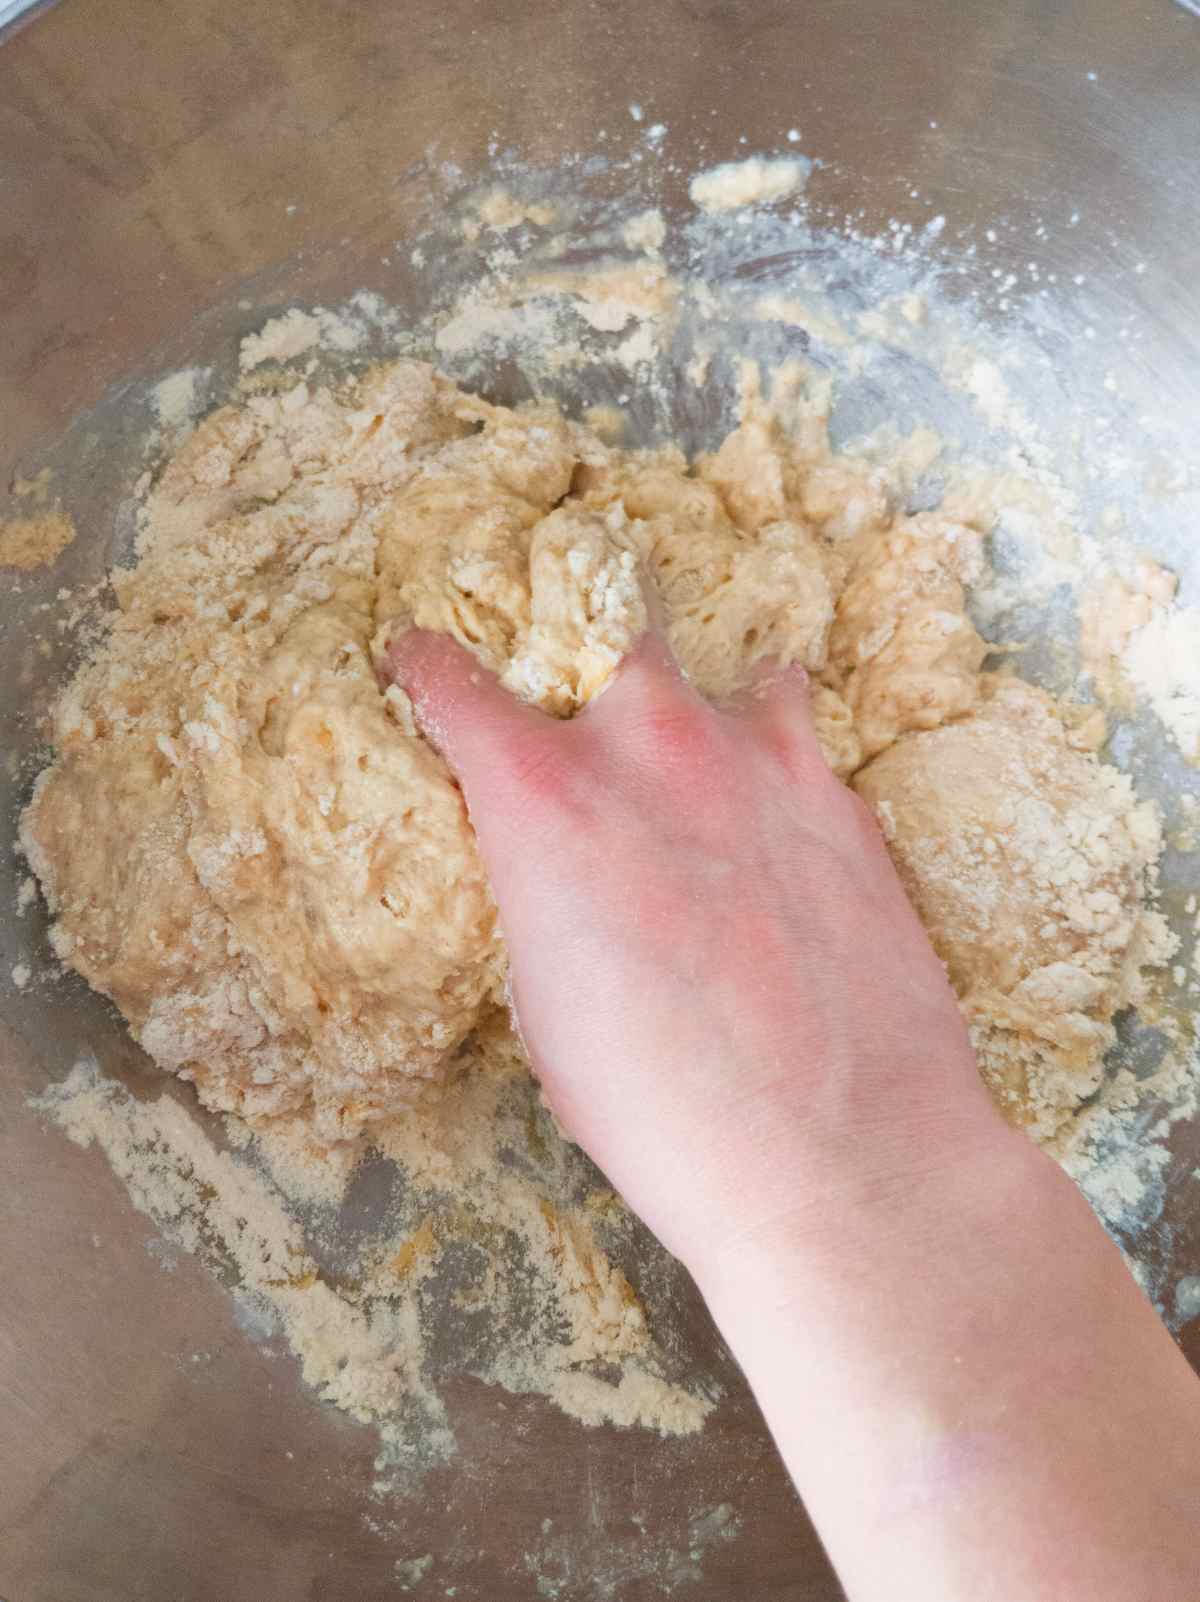 Mixing the dough by hand in a large metal bowl.